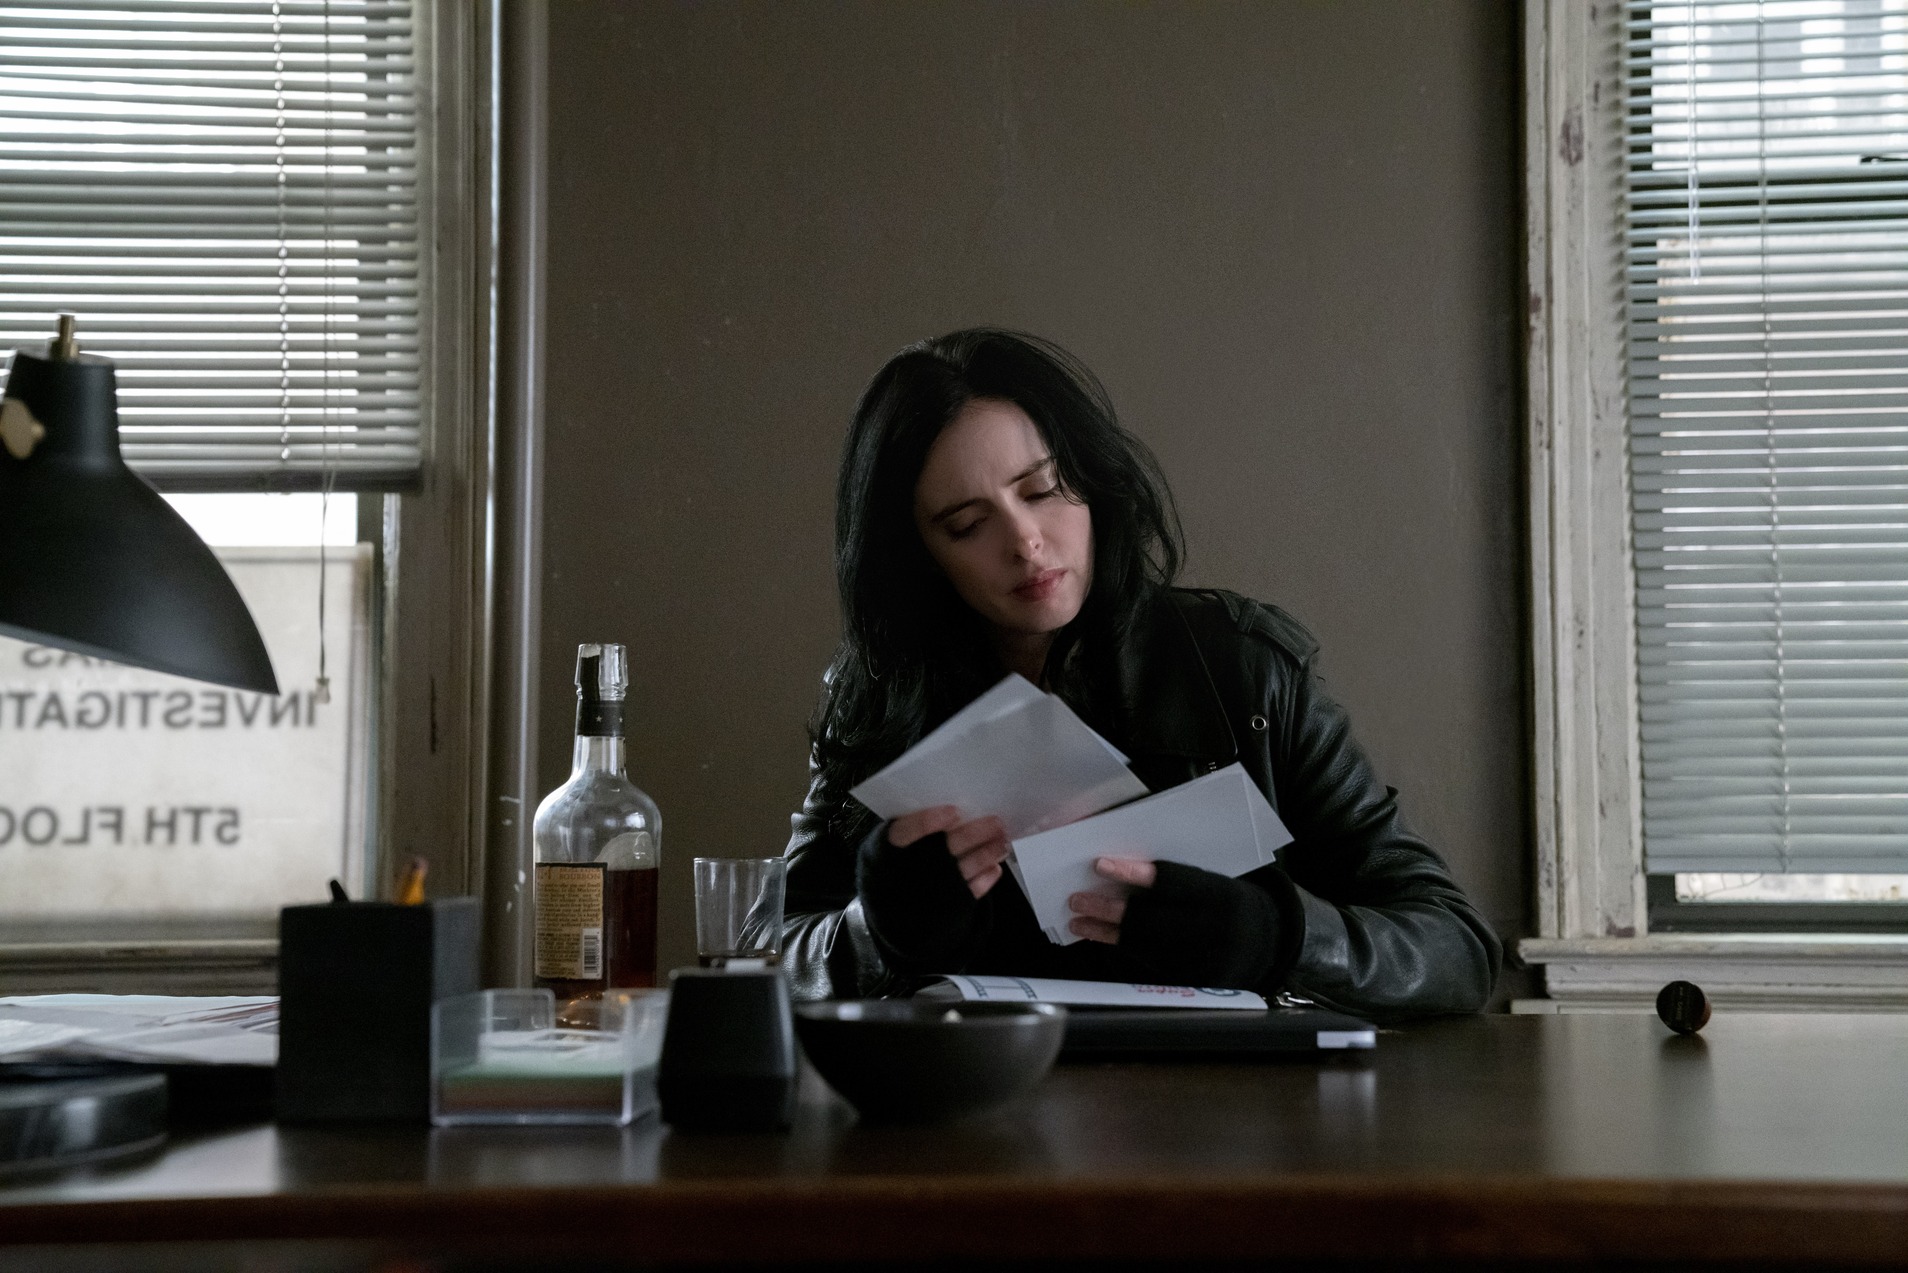 A woman looks through papers at a desk in this image from Marvel Television.